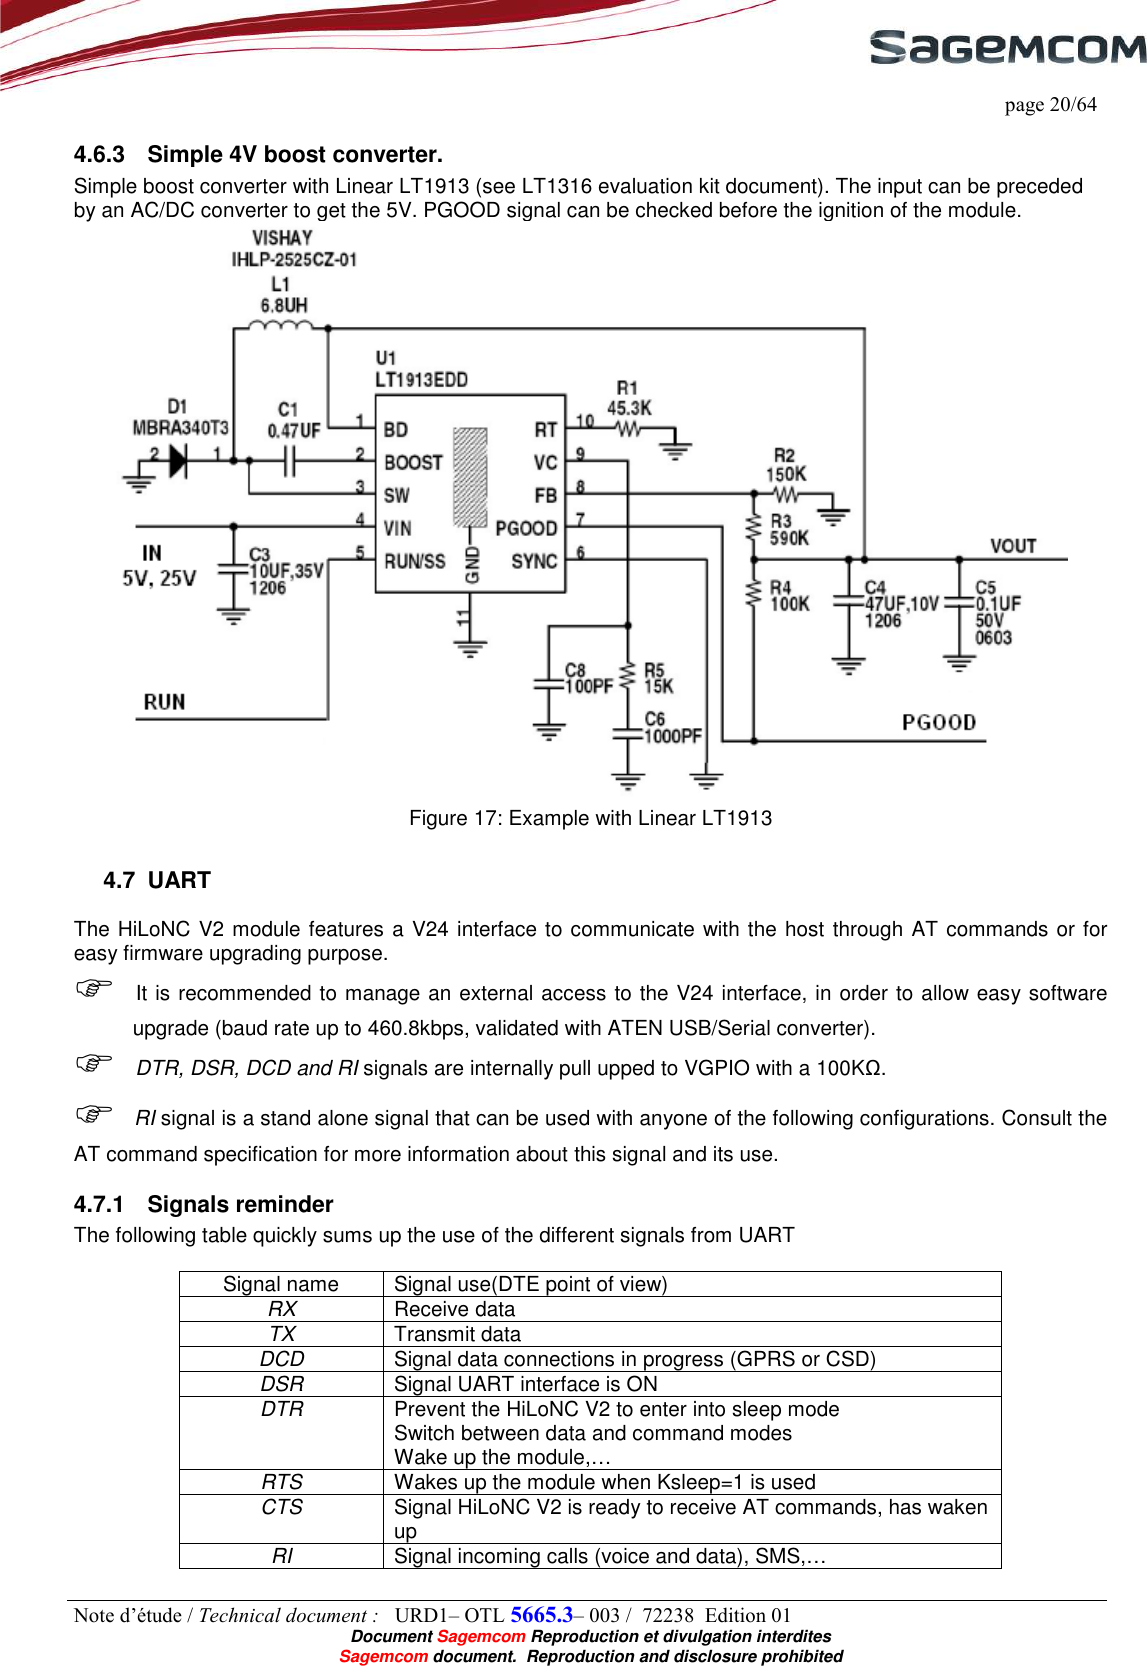     page 20/64 Note d’étude / Technical document :   URD1– OTL 5665.3– 003 /  72238  Edition 01  Document Sagemcom Reproduction et divulgation interdites Sagemcom document.  Reproduction and disclosure prohibited 4.6.3  Simple 4V boost converter. Simple boost converter with Linear LT1913 (see LT1316 evaluation kit document). The input can be preceded by an AC/DC converter to get the 5V. PGOOD signal can be checked before the ignition of the module.  Figure 17: Example with Linear LT1913 4.7  UART The HiLoNC V2 module features a V24 interface to communicate with the host through AT commands or for easy firmware upgrading purpose.  It is recommended to manage an external access to the V24 interface, in order to allow easy software upgrade (baud rate up to 460.8kbps, validated with ATEN USB/Serial converter).   DTR, DSR, DCD and RI signals are internally pull upped to VGPIO with a 100KΩ.  RI signal is a stand alone signal that can be used with anyone of the following configurations. Consult the AT command specification for more information about this signal and its use. 4.7.1  Signals reminder The following table quickly sums up the use of the different signals from UART  Signal name  Signal use(DTE point of view) RX  Receive data TX  Transmit data DCD  Signal data connections in progress (GPRS or CSD) DSR  Signal UART interface is ON DTR  Prevent the HiLoNC V2 to enter into sleep mode Switch between data and command modes Wake up the module,… RTS  Wakes up the module when Ksleep=1 is used CTS  Signal HiLoNC V2 is ready to receive AT commands, has waken up RI  Signal incoming calls (voice and data), SMS,…   